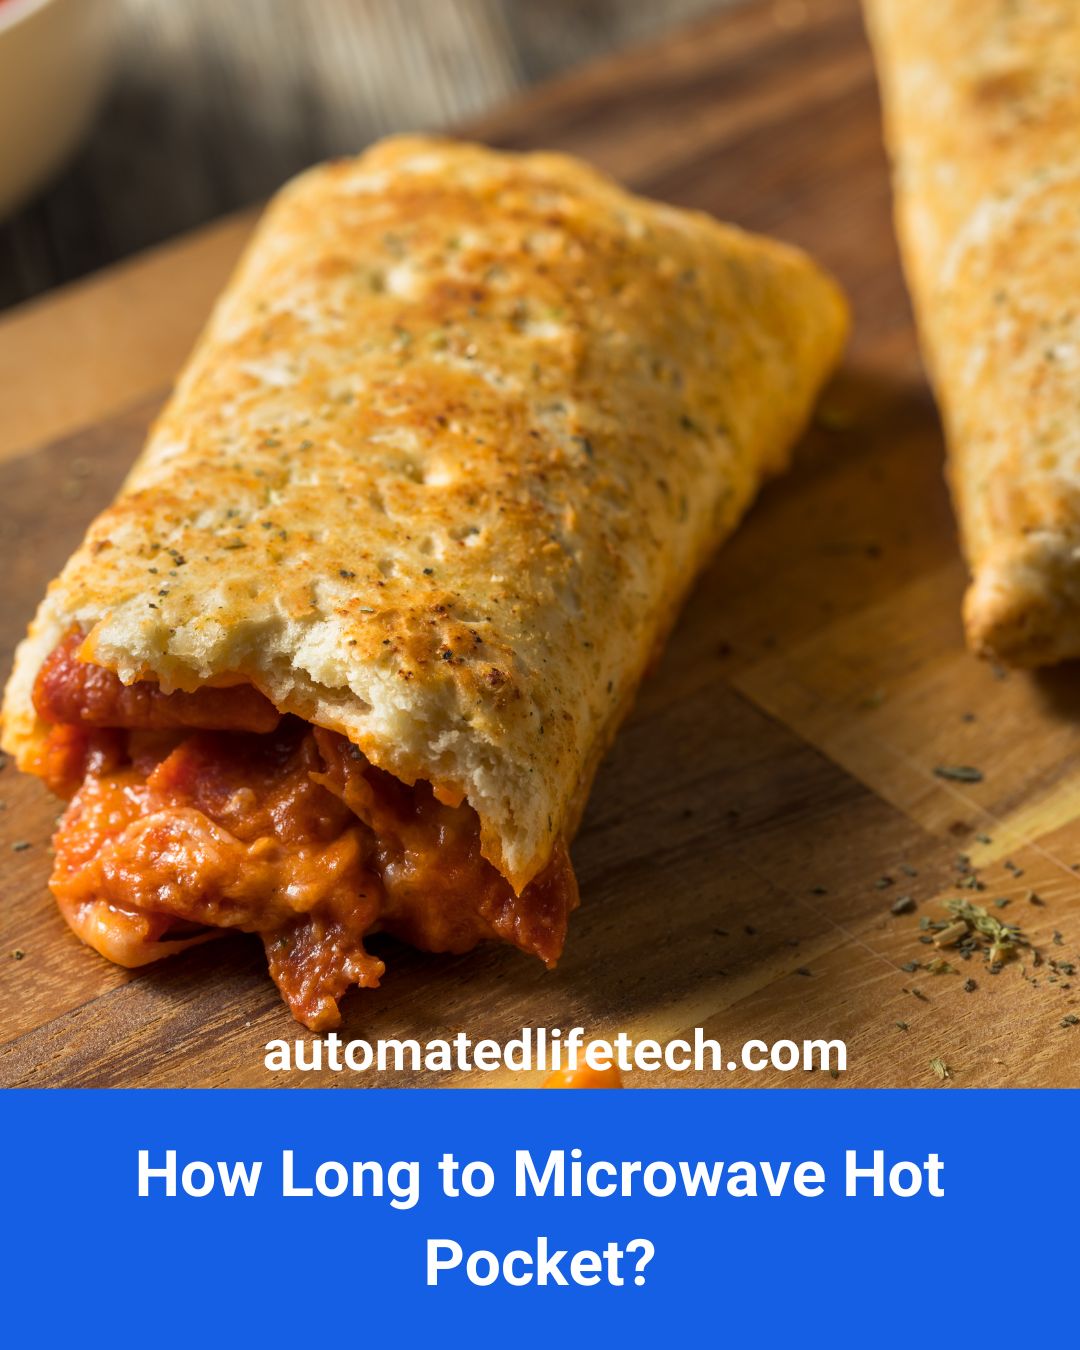 How Long to Microwave Hot Pocket